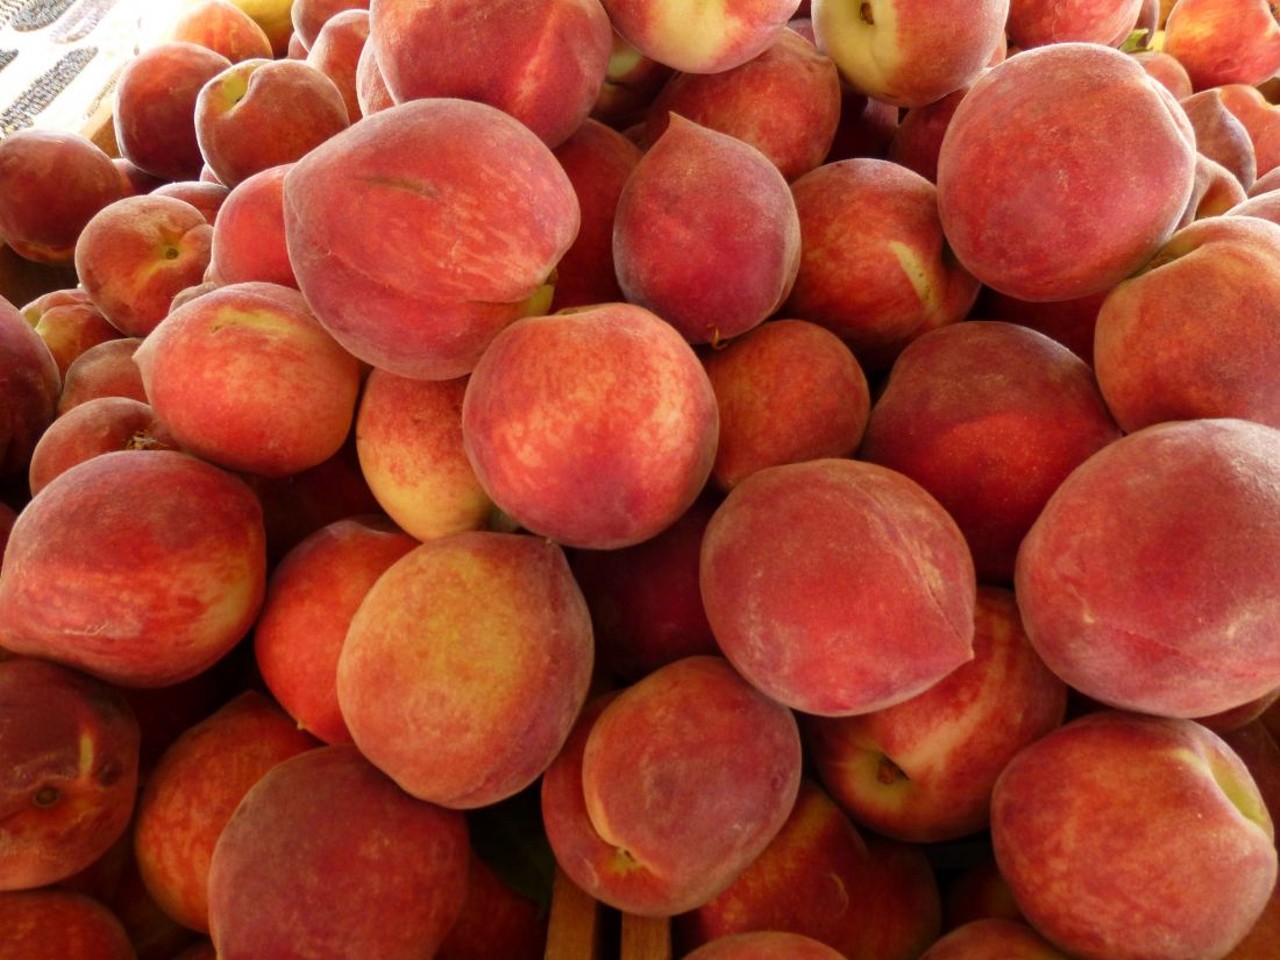 Peach Festival
August 12, 2018
Grafton, IL
When&#146;s the last time you bit into a fresh, juicy peach? We bet it&#146;s been too long. Think of the color. The scent. The soft little fuzz. Yeah, you want one, don&#146;t you? Well don&#146;t worry because the Peach Festival in Grafton, Illinois, will hook you up! This tasty party takes place at legendary Pere Marquette, so you can enjoy the view and the amenities while you&#146;re noshing.
Photo courtesy of Mike Licht / Flickr
Find more information about the event here.